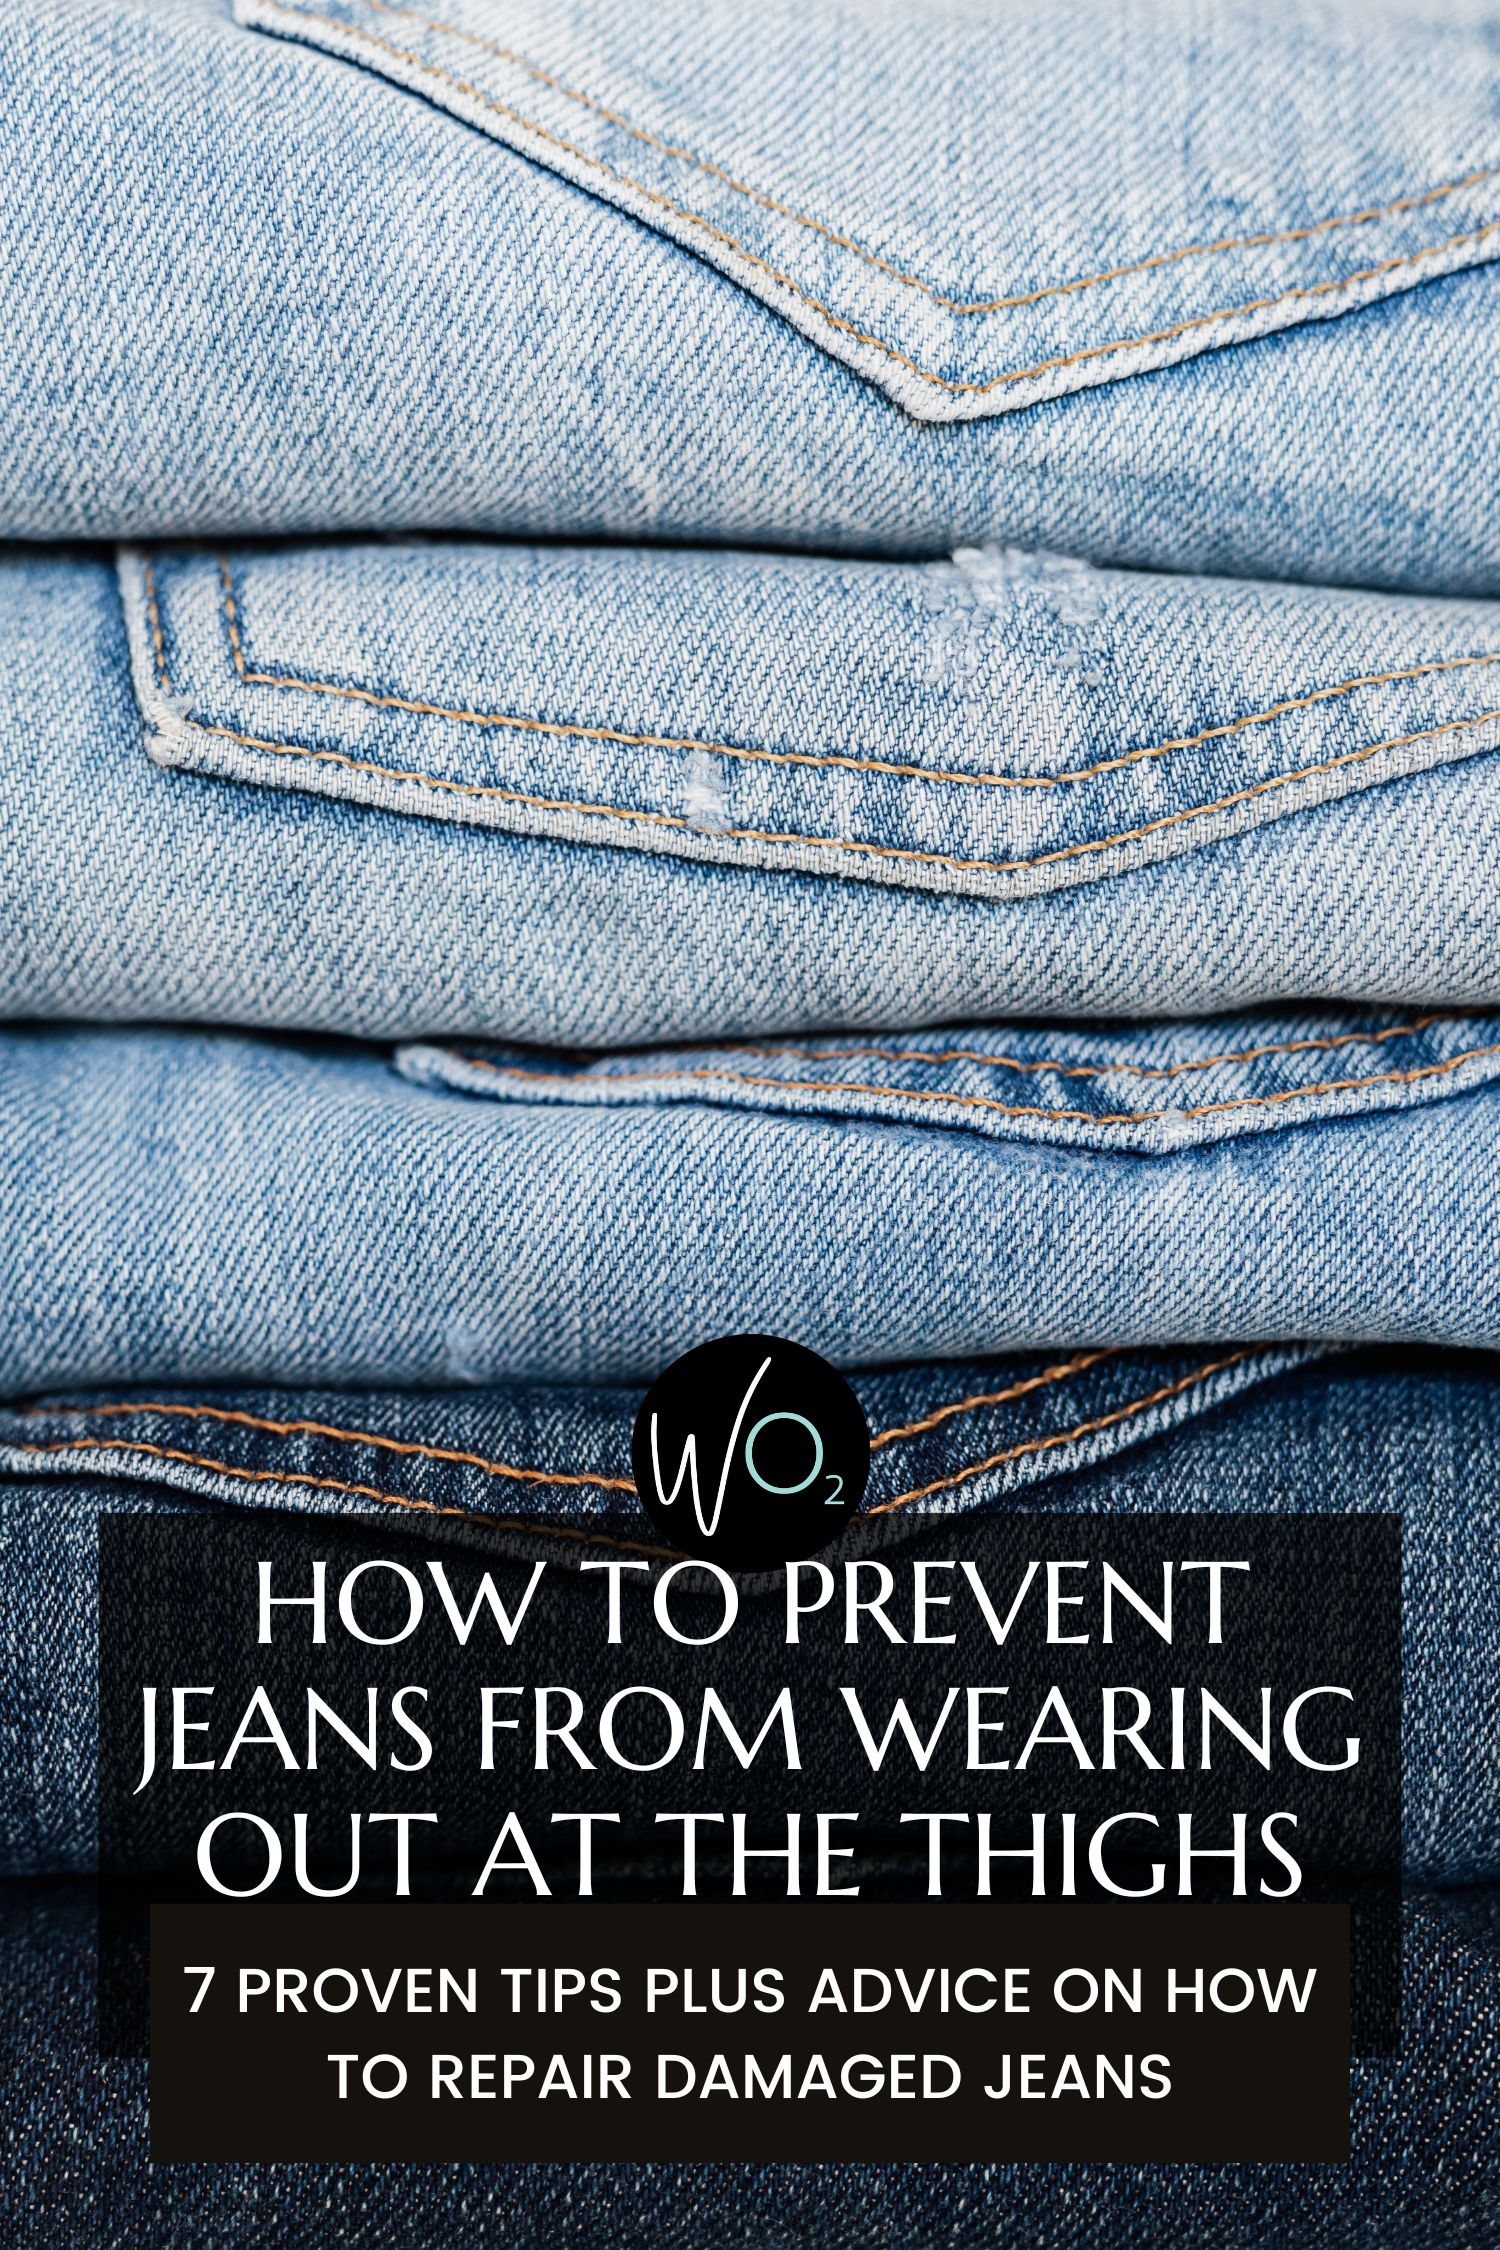 10 Types of Denim Washes and How to Wear Them  thredUP Blog